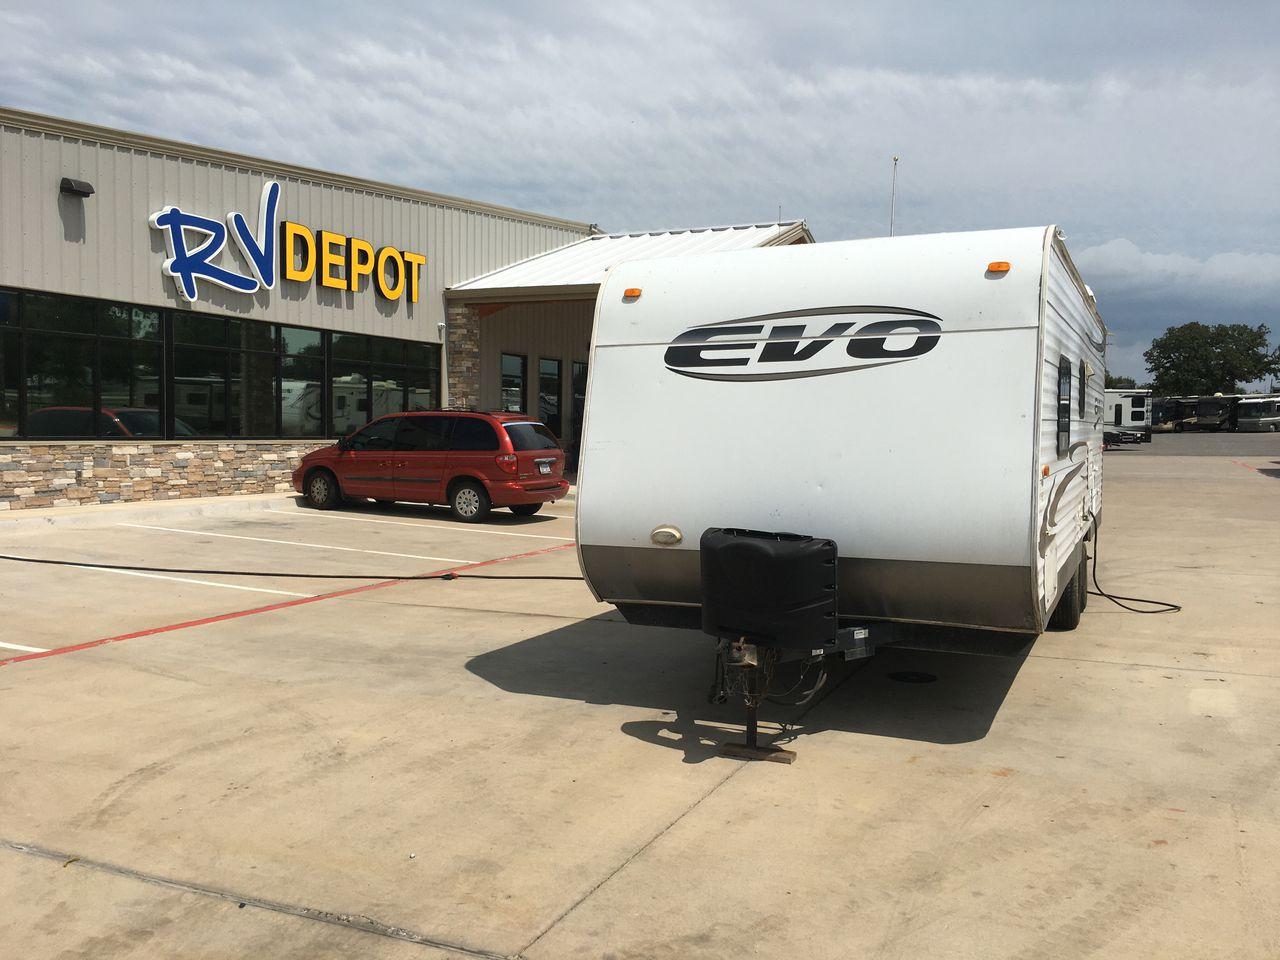 2013 WHITE FOREST RIVER EVO T1860 - (4X4TSJY20DC) , Length: 22.58 ft. | Slides: 0 transmission, located at 4319 N Main Street, Cleburne, TX, 76033, (817) 221-0660, 32.435829, -97.384178 - The 2013 Forest River Evo T1860 Travel Trailer allows you to enjoy the beauty of nature. This 22.58-foot-long trailer is both compact and adaptable, providing a snug haven for your camping activities. While it lacks slides, it compensates with smart design elements and considerate amenities. Step in - Photo #0